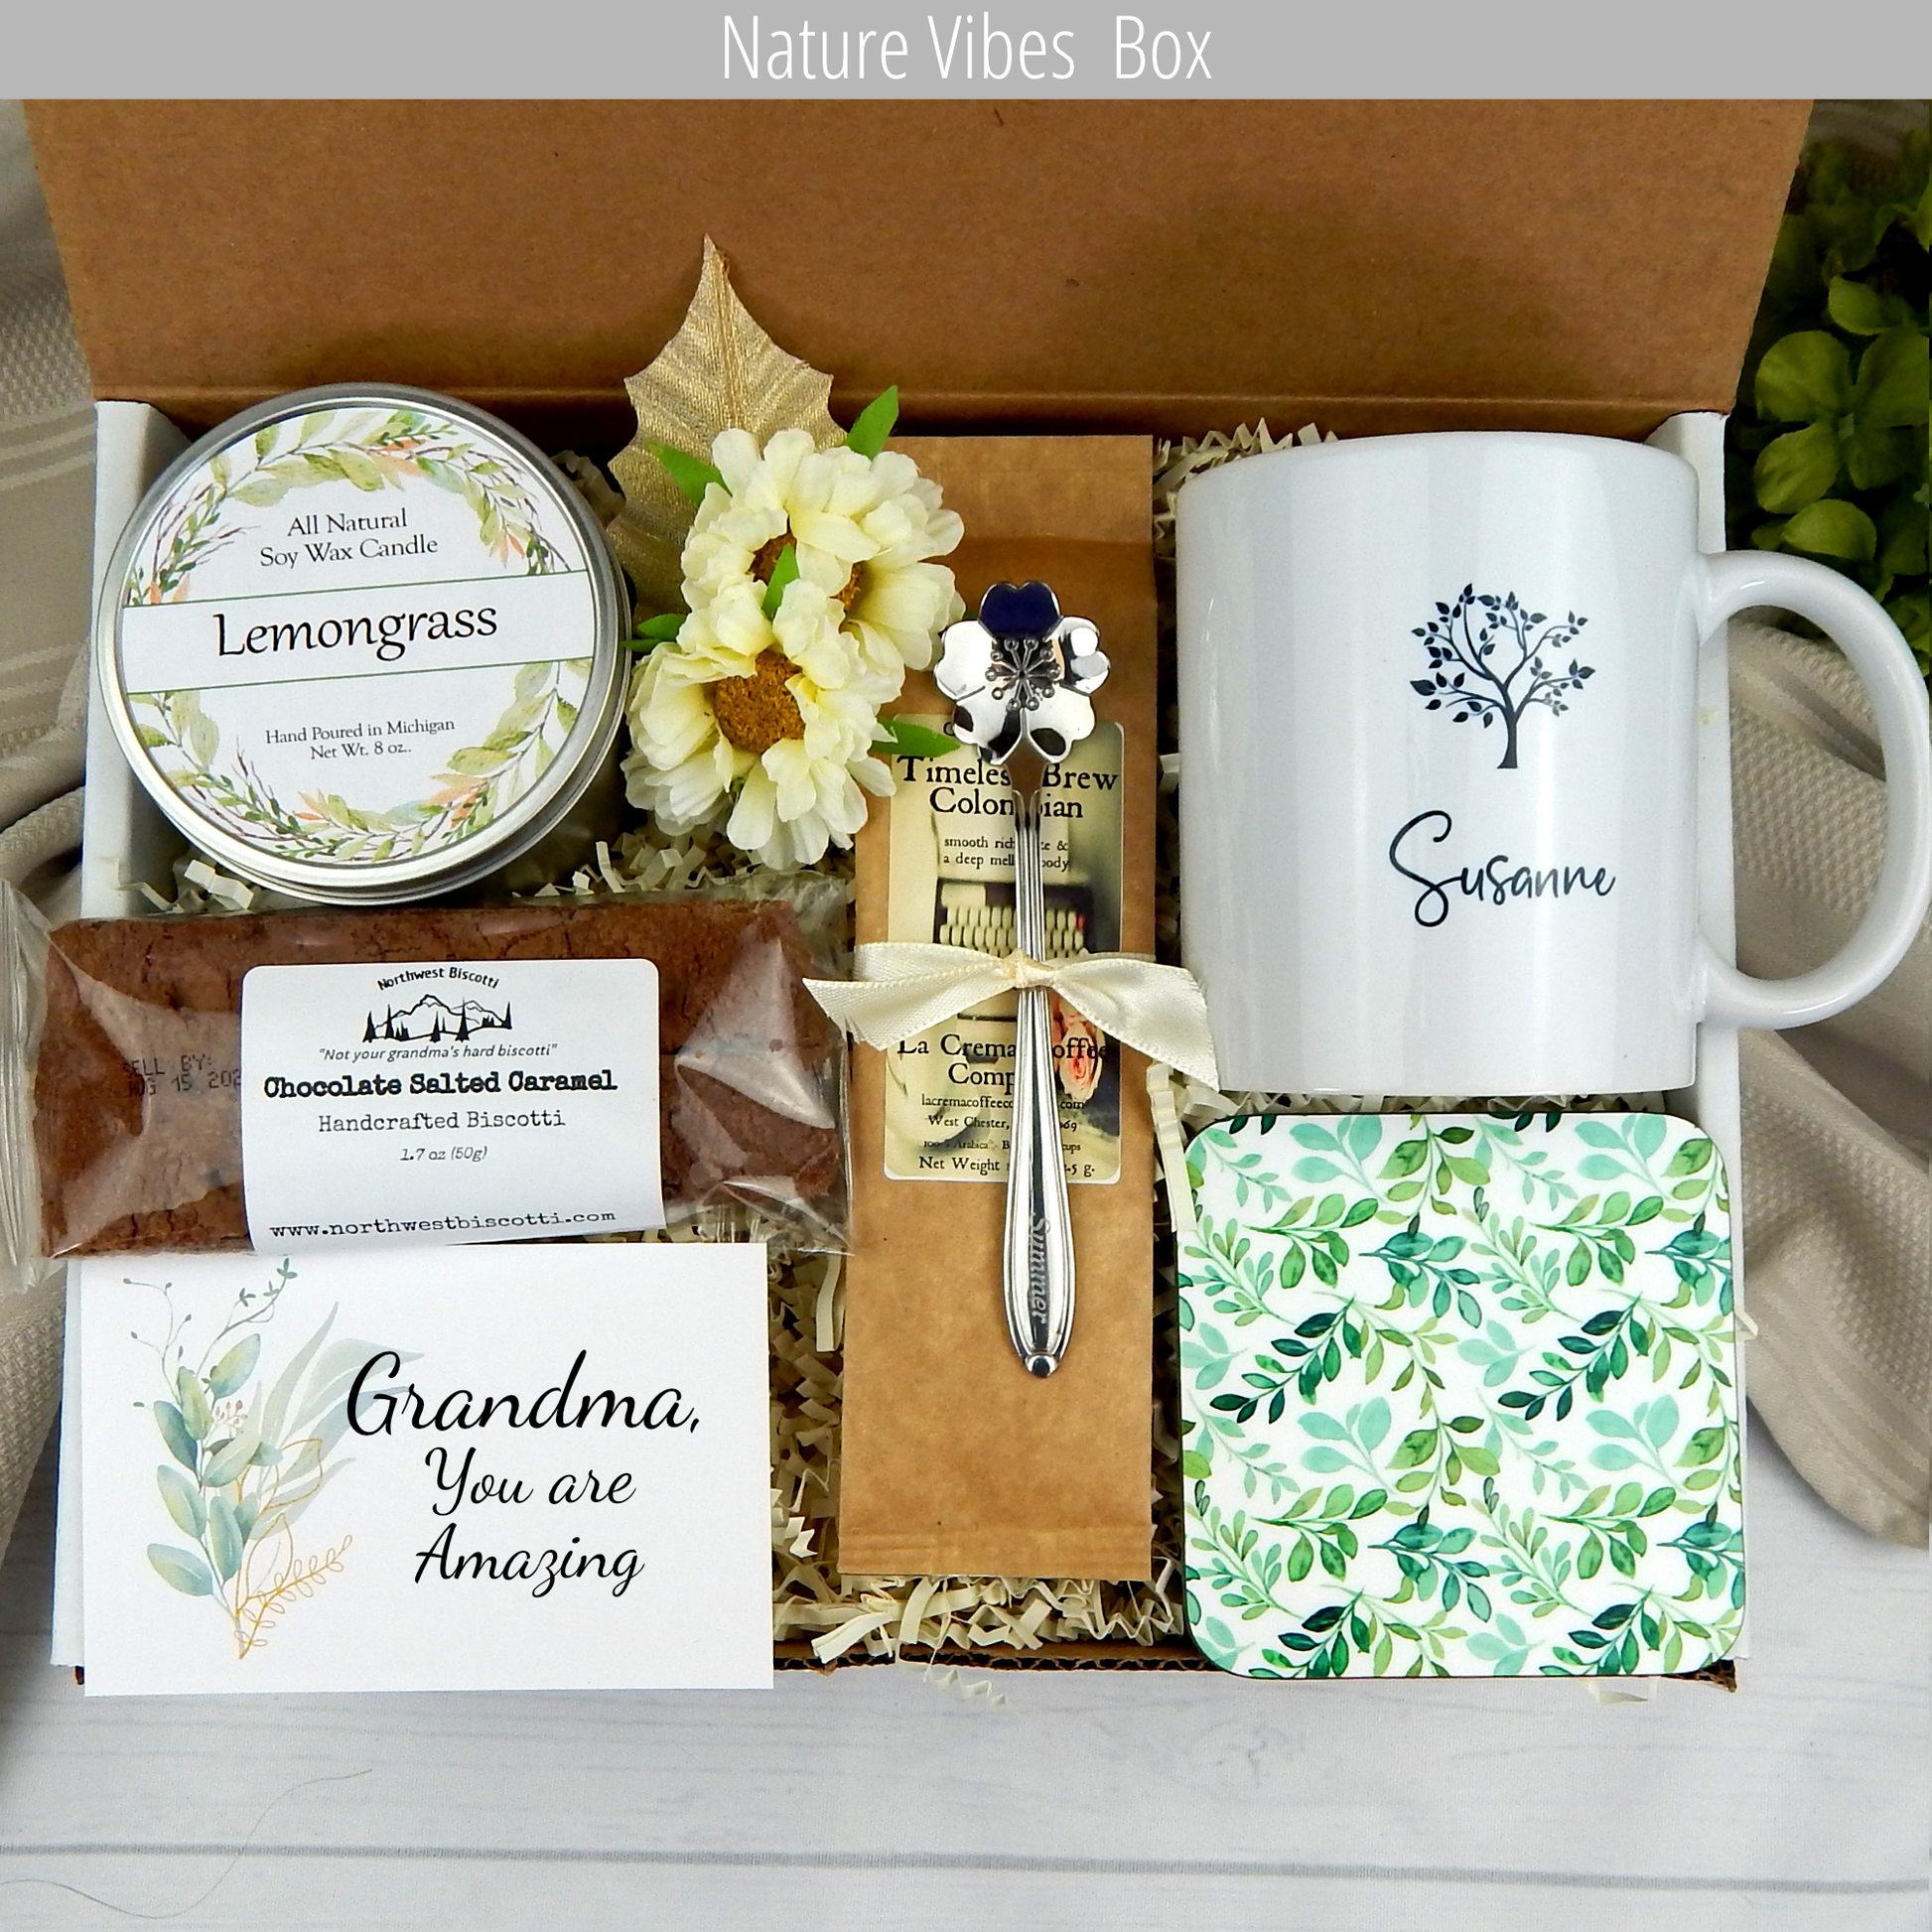 Celebrate Grandma's love: Personalized name mug, candle, engraved spoon, biscotti, and coffee in a gift basket.